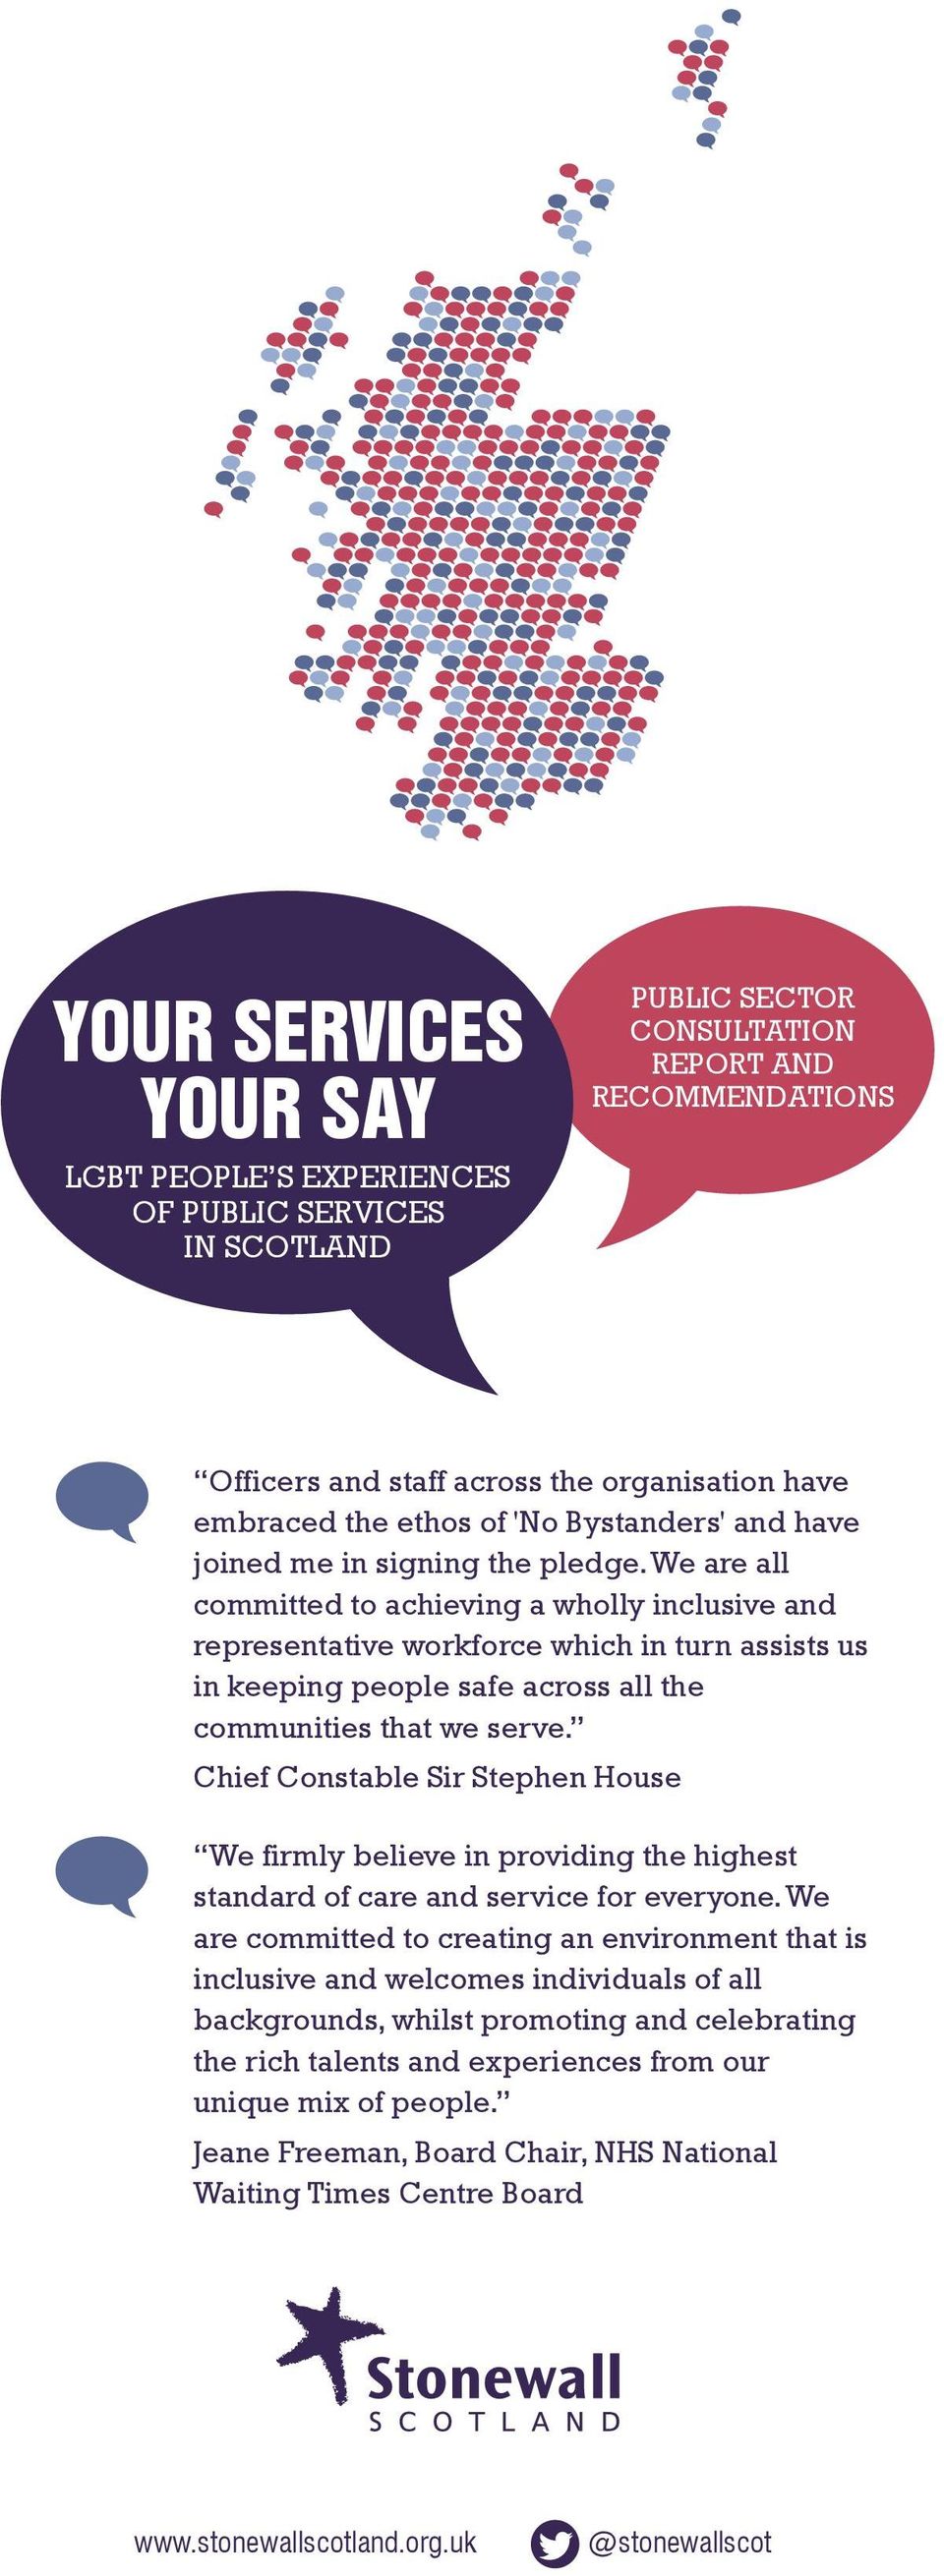 We are all committed to achieving a wholly inclusive and representative workforce which in turn assists us in keeping people safe across all the communities that we serve.